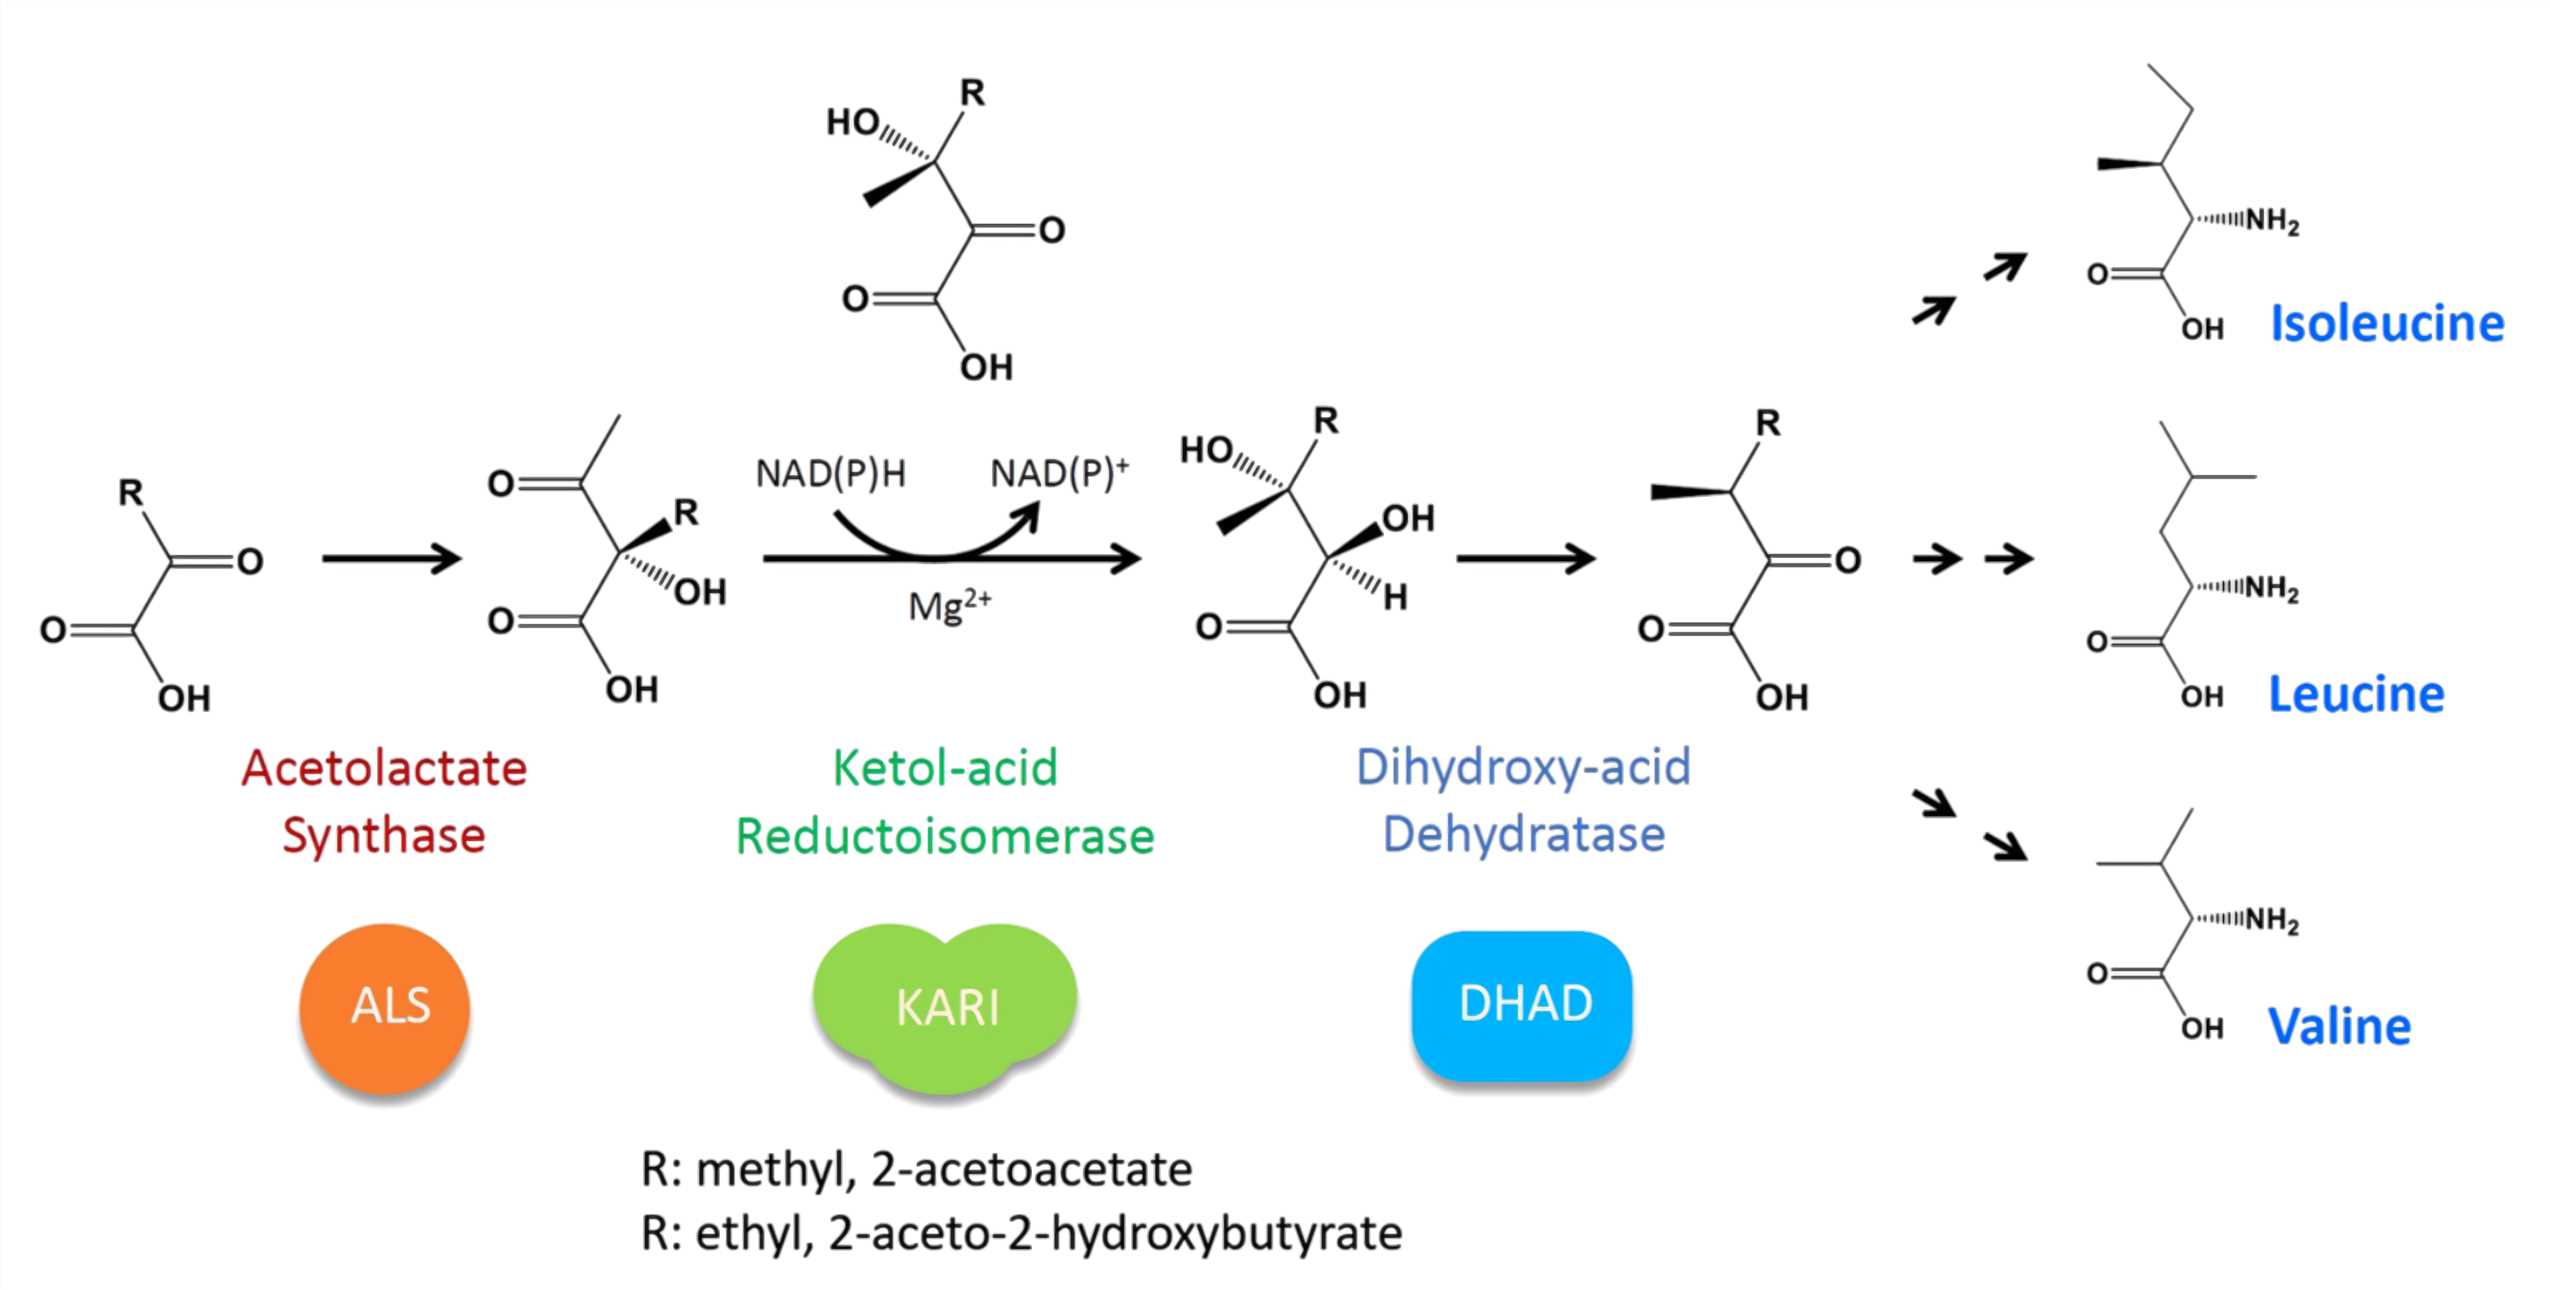 Biosynthetic pathways for branched-chain amino acids catalyzed by KARI.